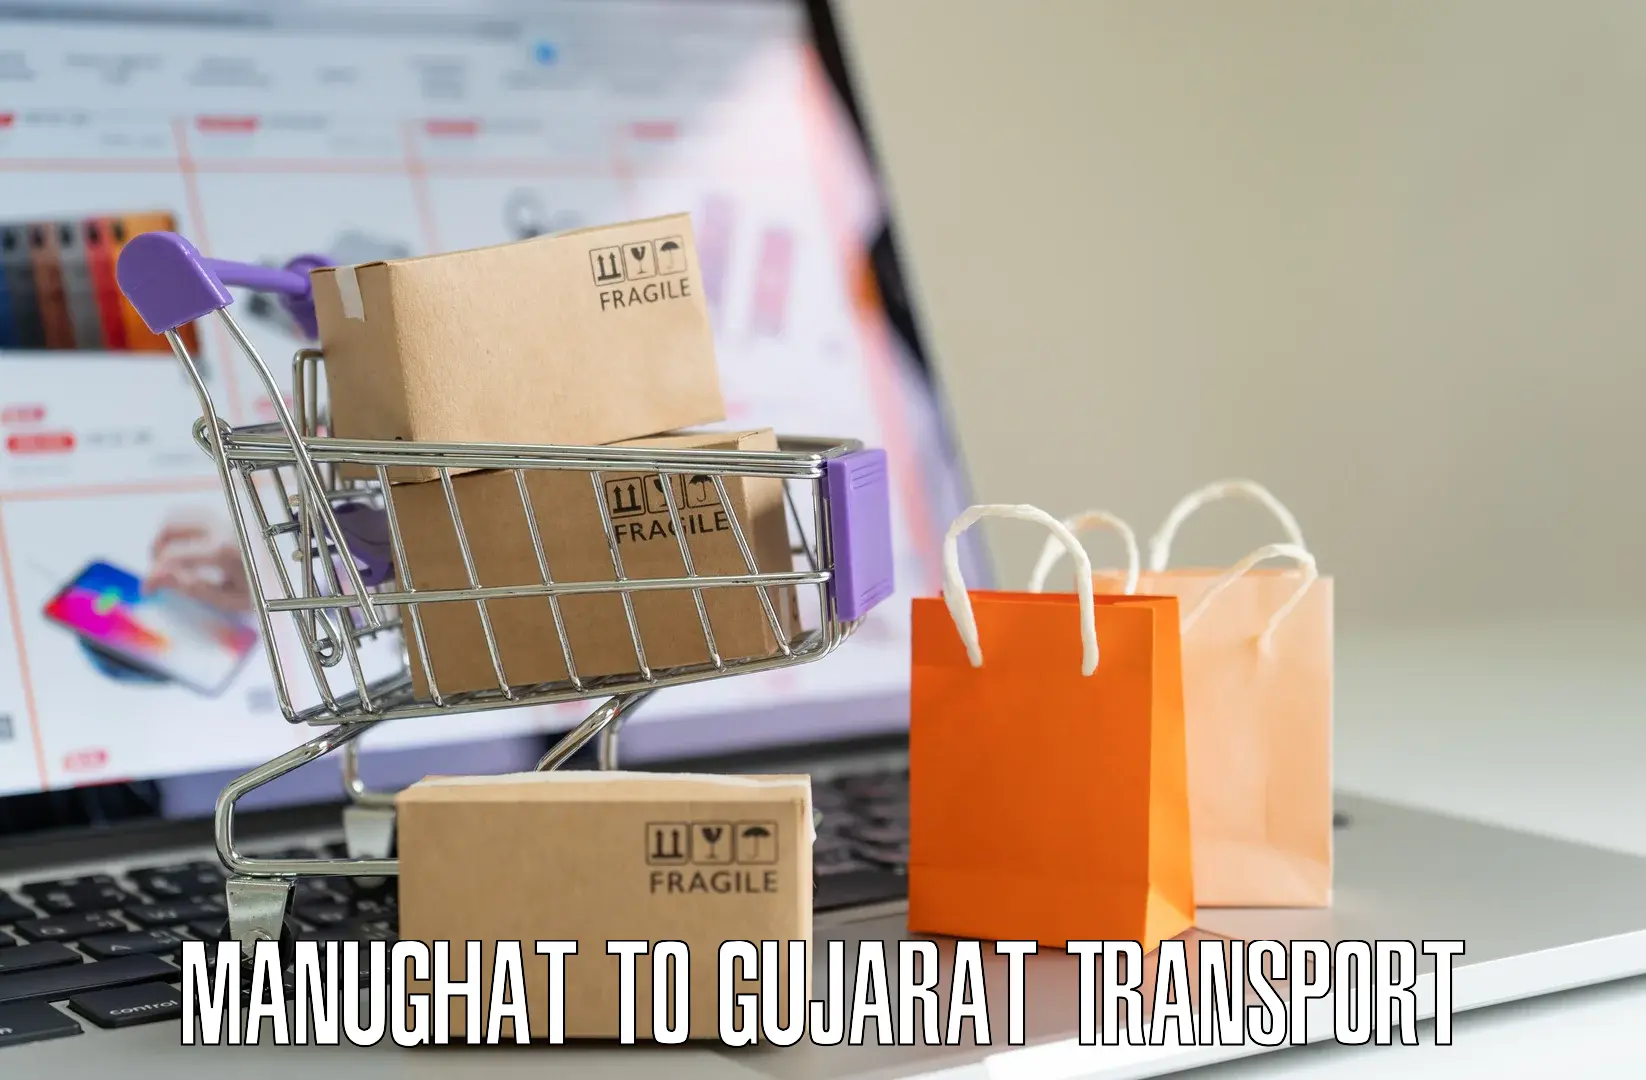 Express transport services in Manughat to Dholera